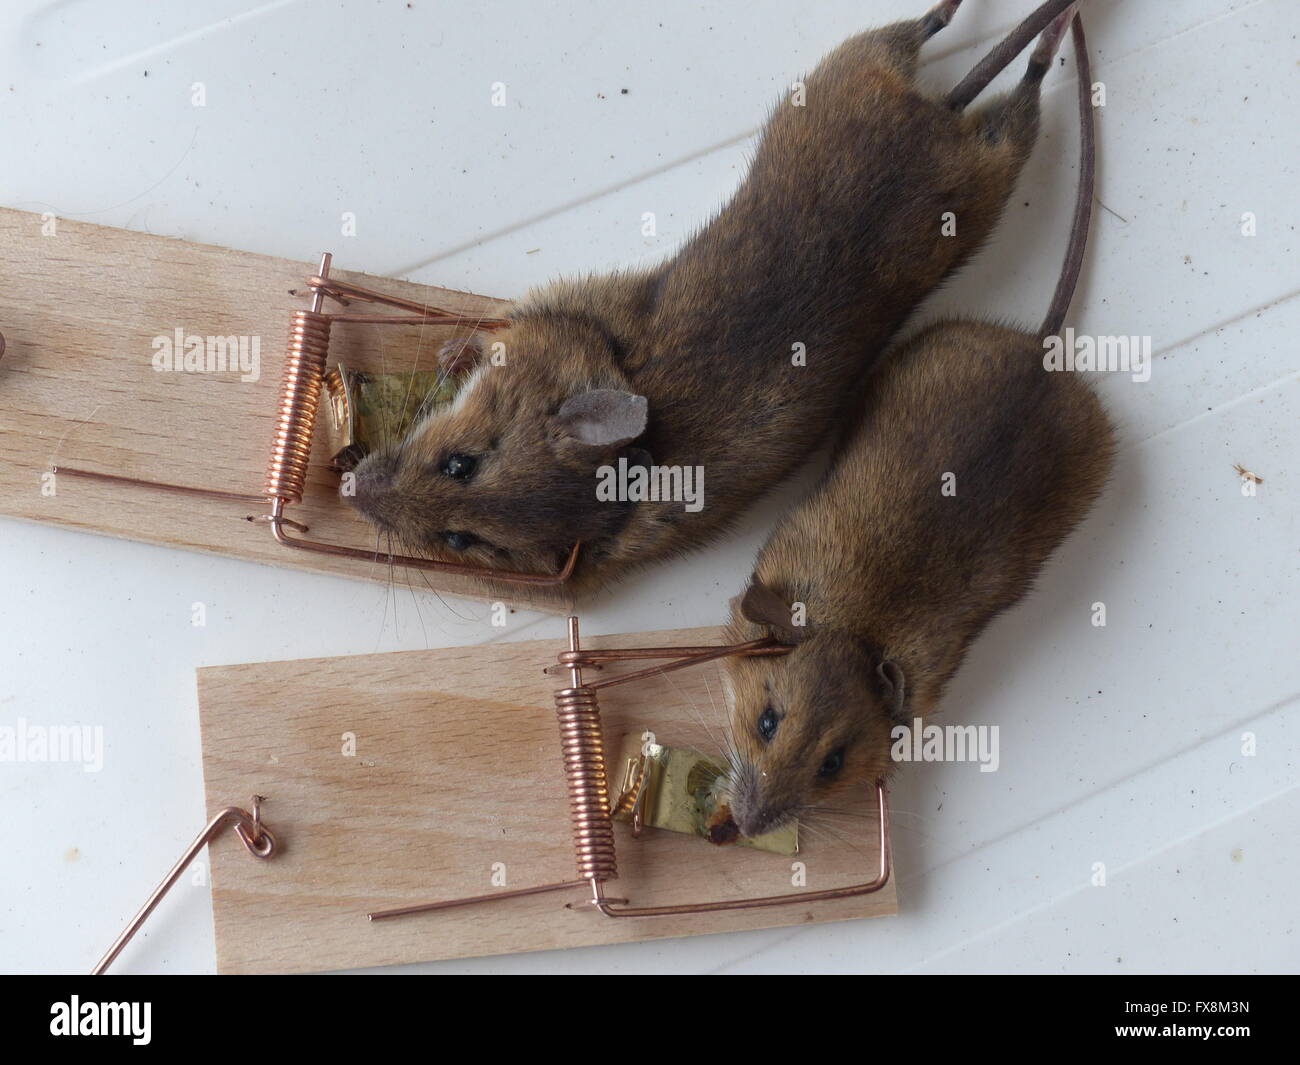 https://c8.alamy.com/comp/FX8M3N/mice-caught-and-killed-in-mouse-trap-FX8M3N.jpg